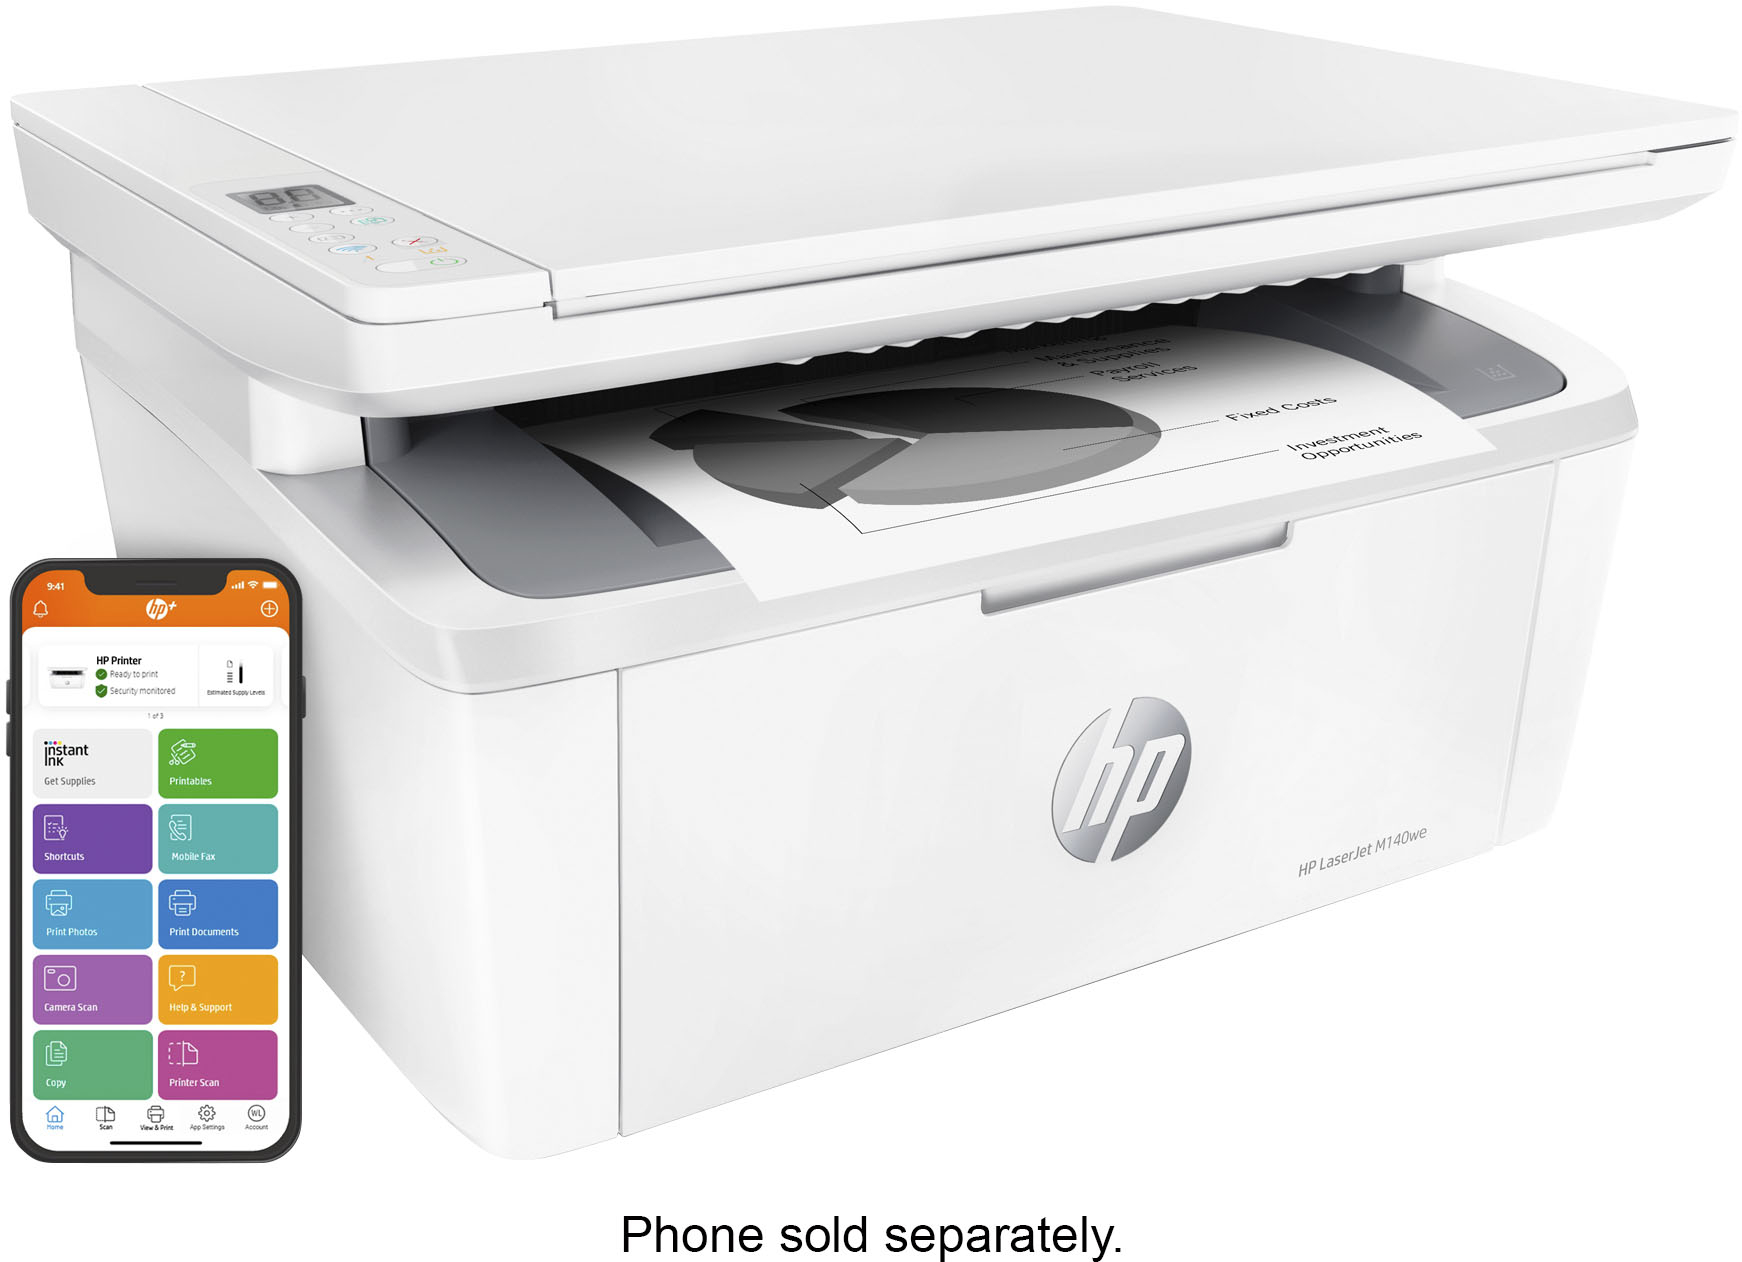 HP LaserJet MFP M139we Wireless Black & White Laser Printer with 6 Months  of Instant Ink included with HP+ 